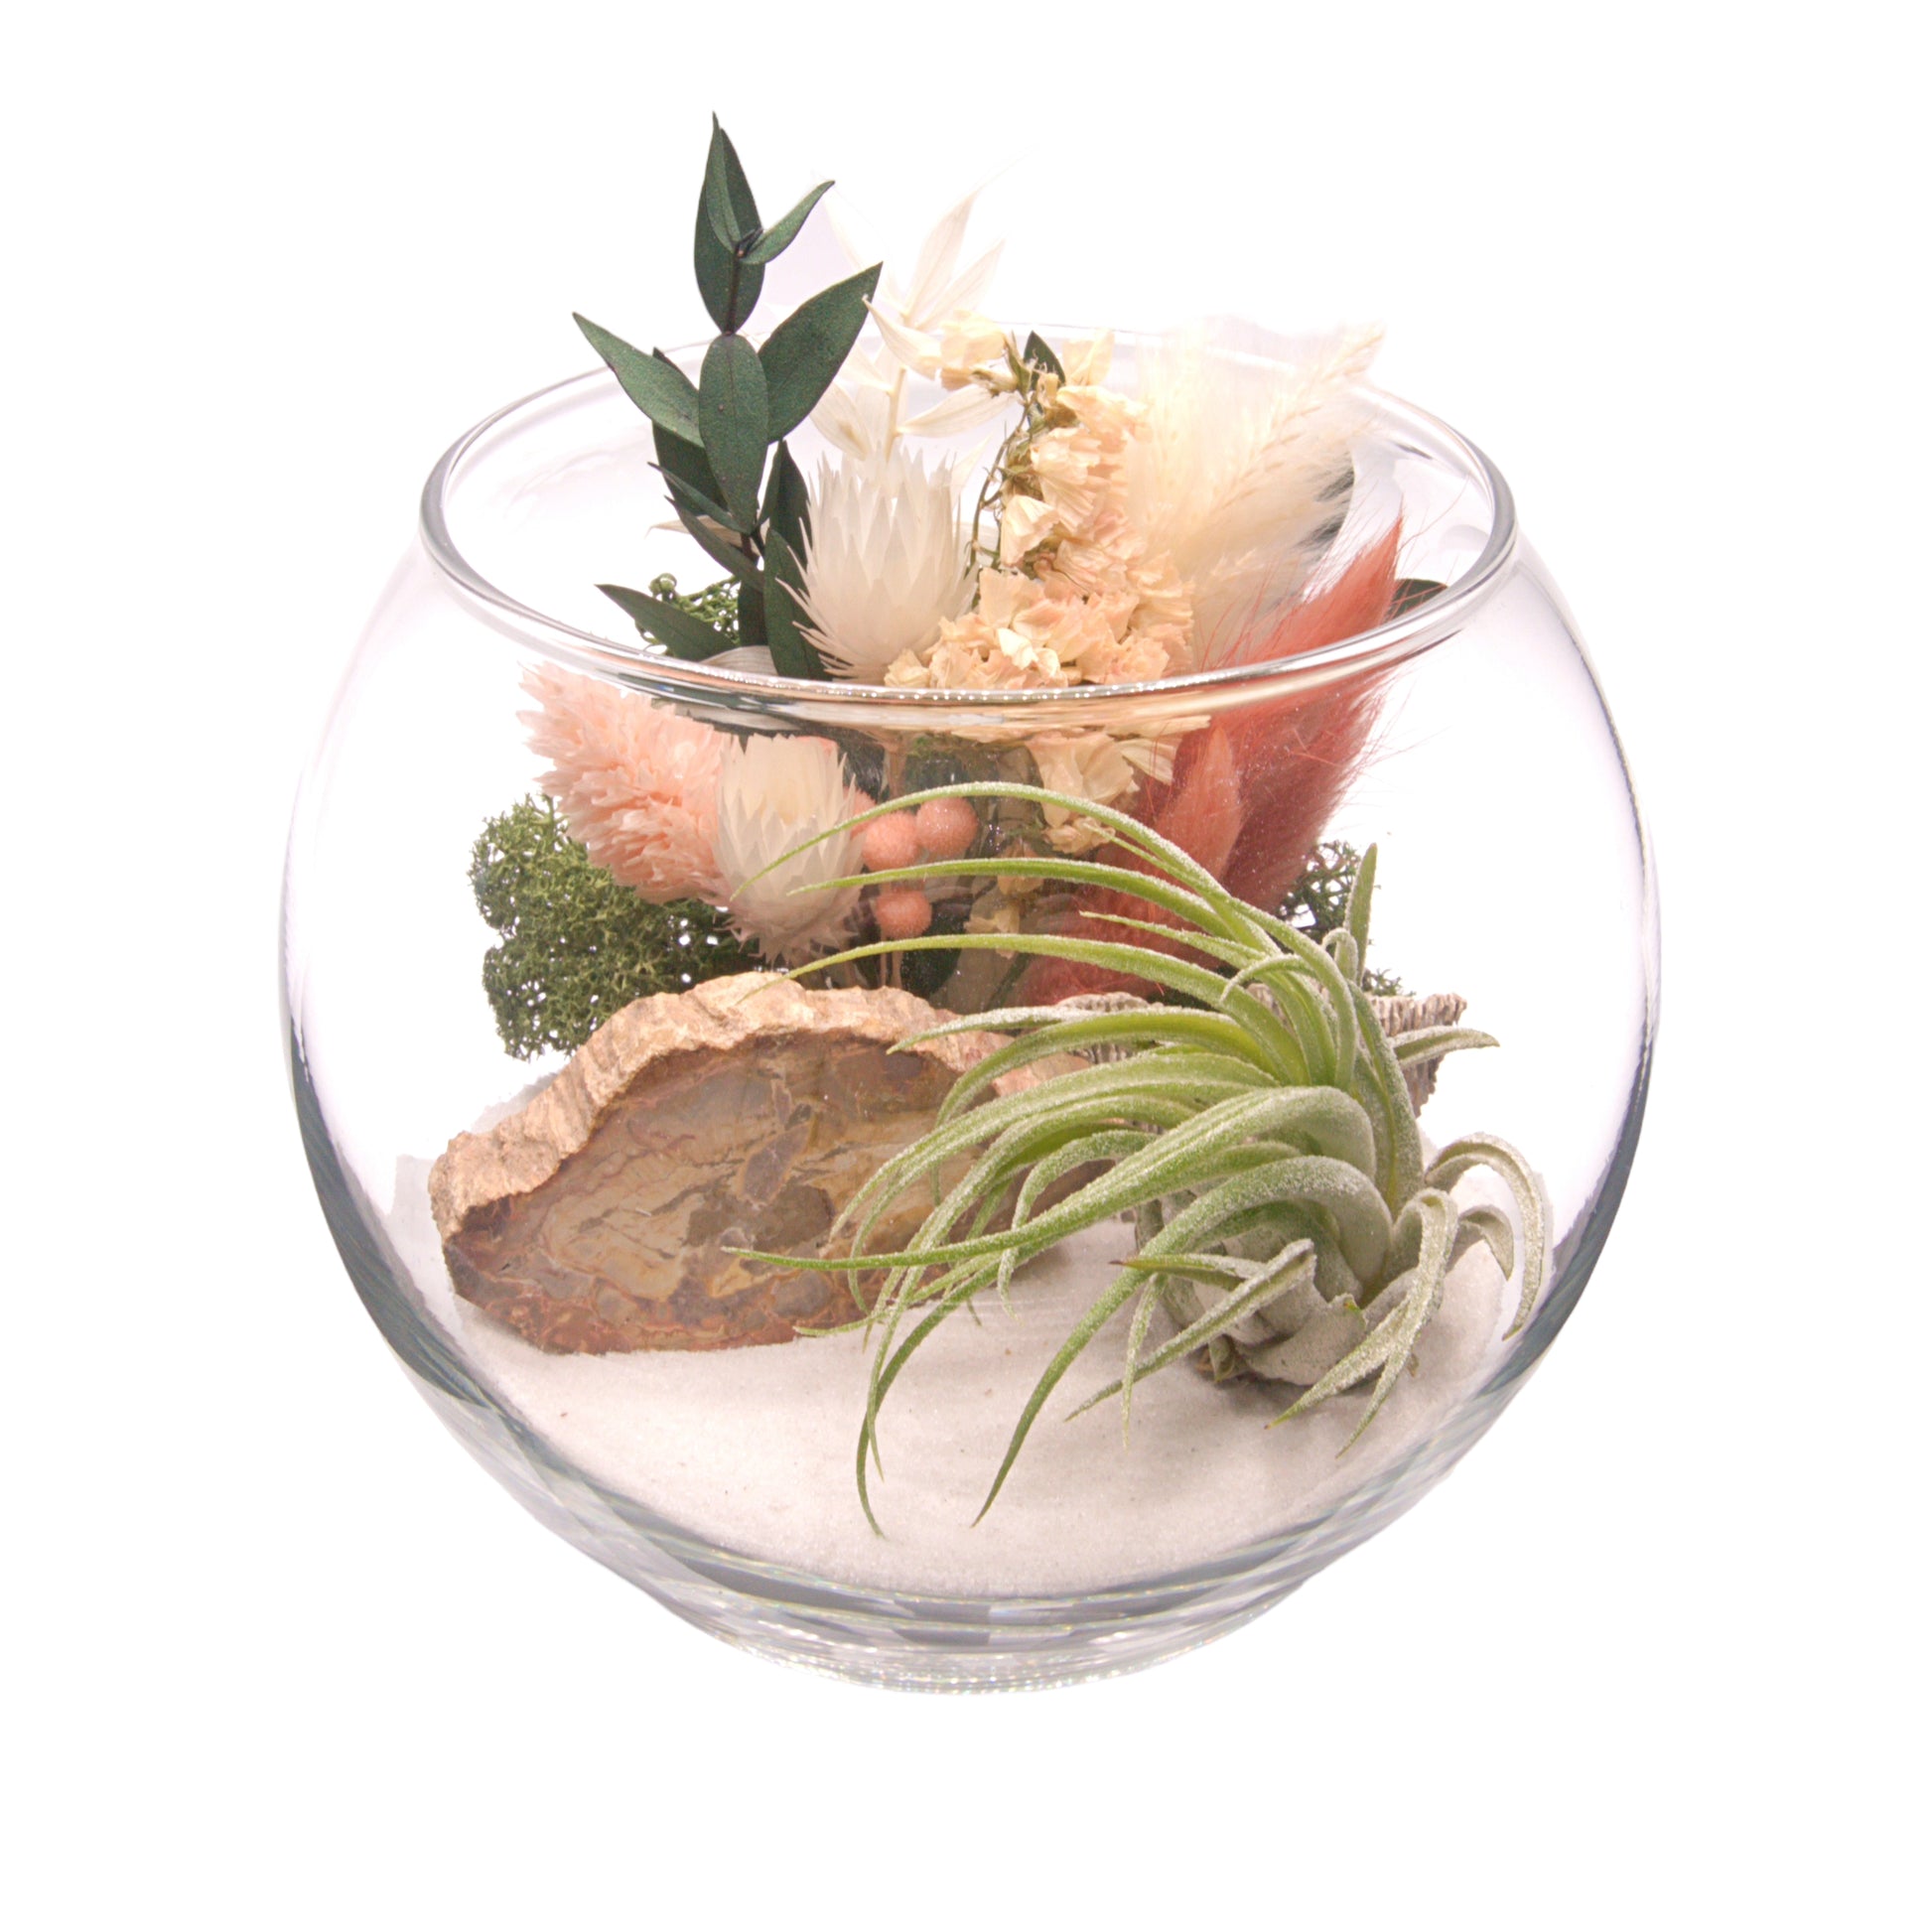 Glass bowl airplant terrarium with dried flowers and fossilized wood